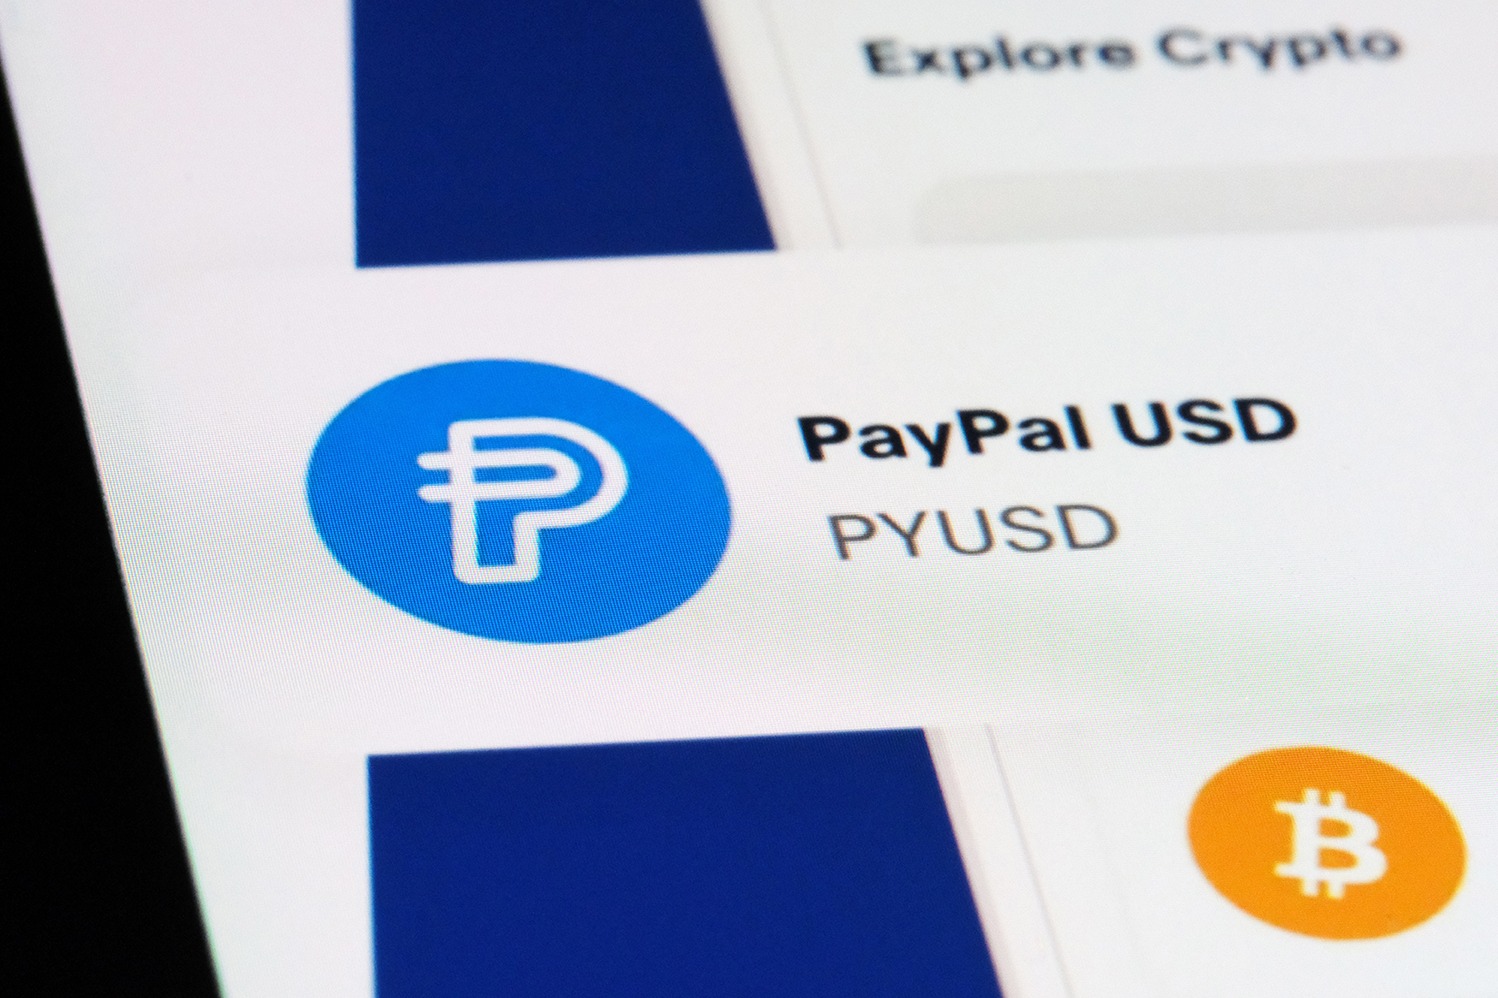 PayPal PYUSD image with a Bitcoin logo. PayPal Stablecoin.